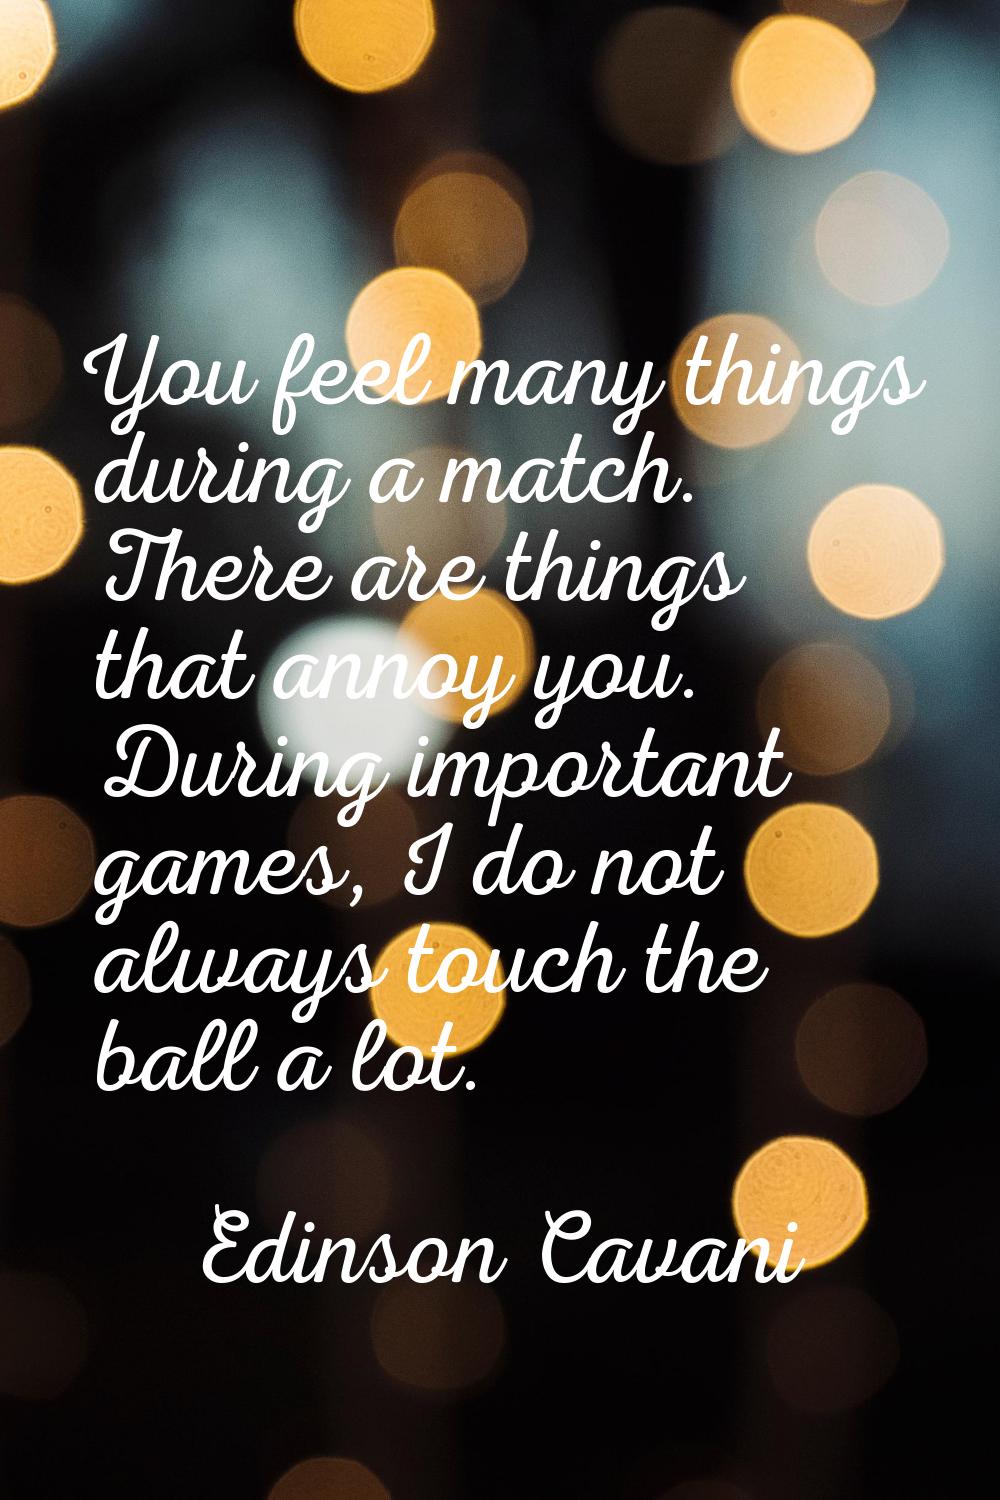 You feel many things during a match. There are things that annoy you. During important games, I do 